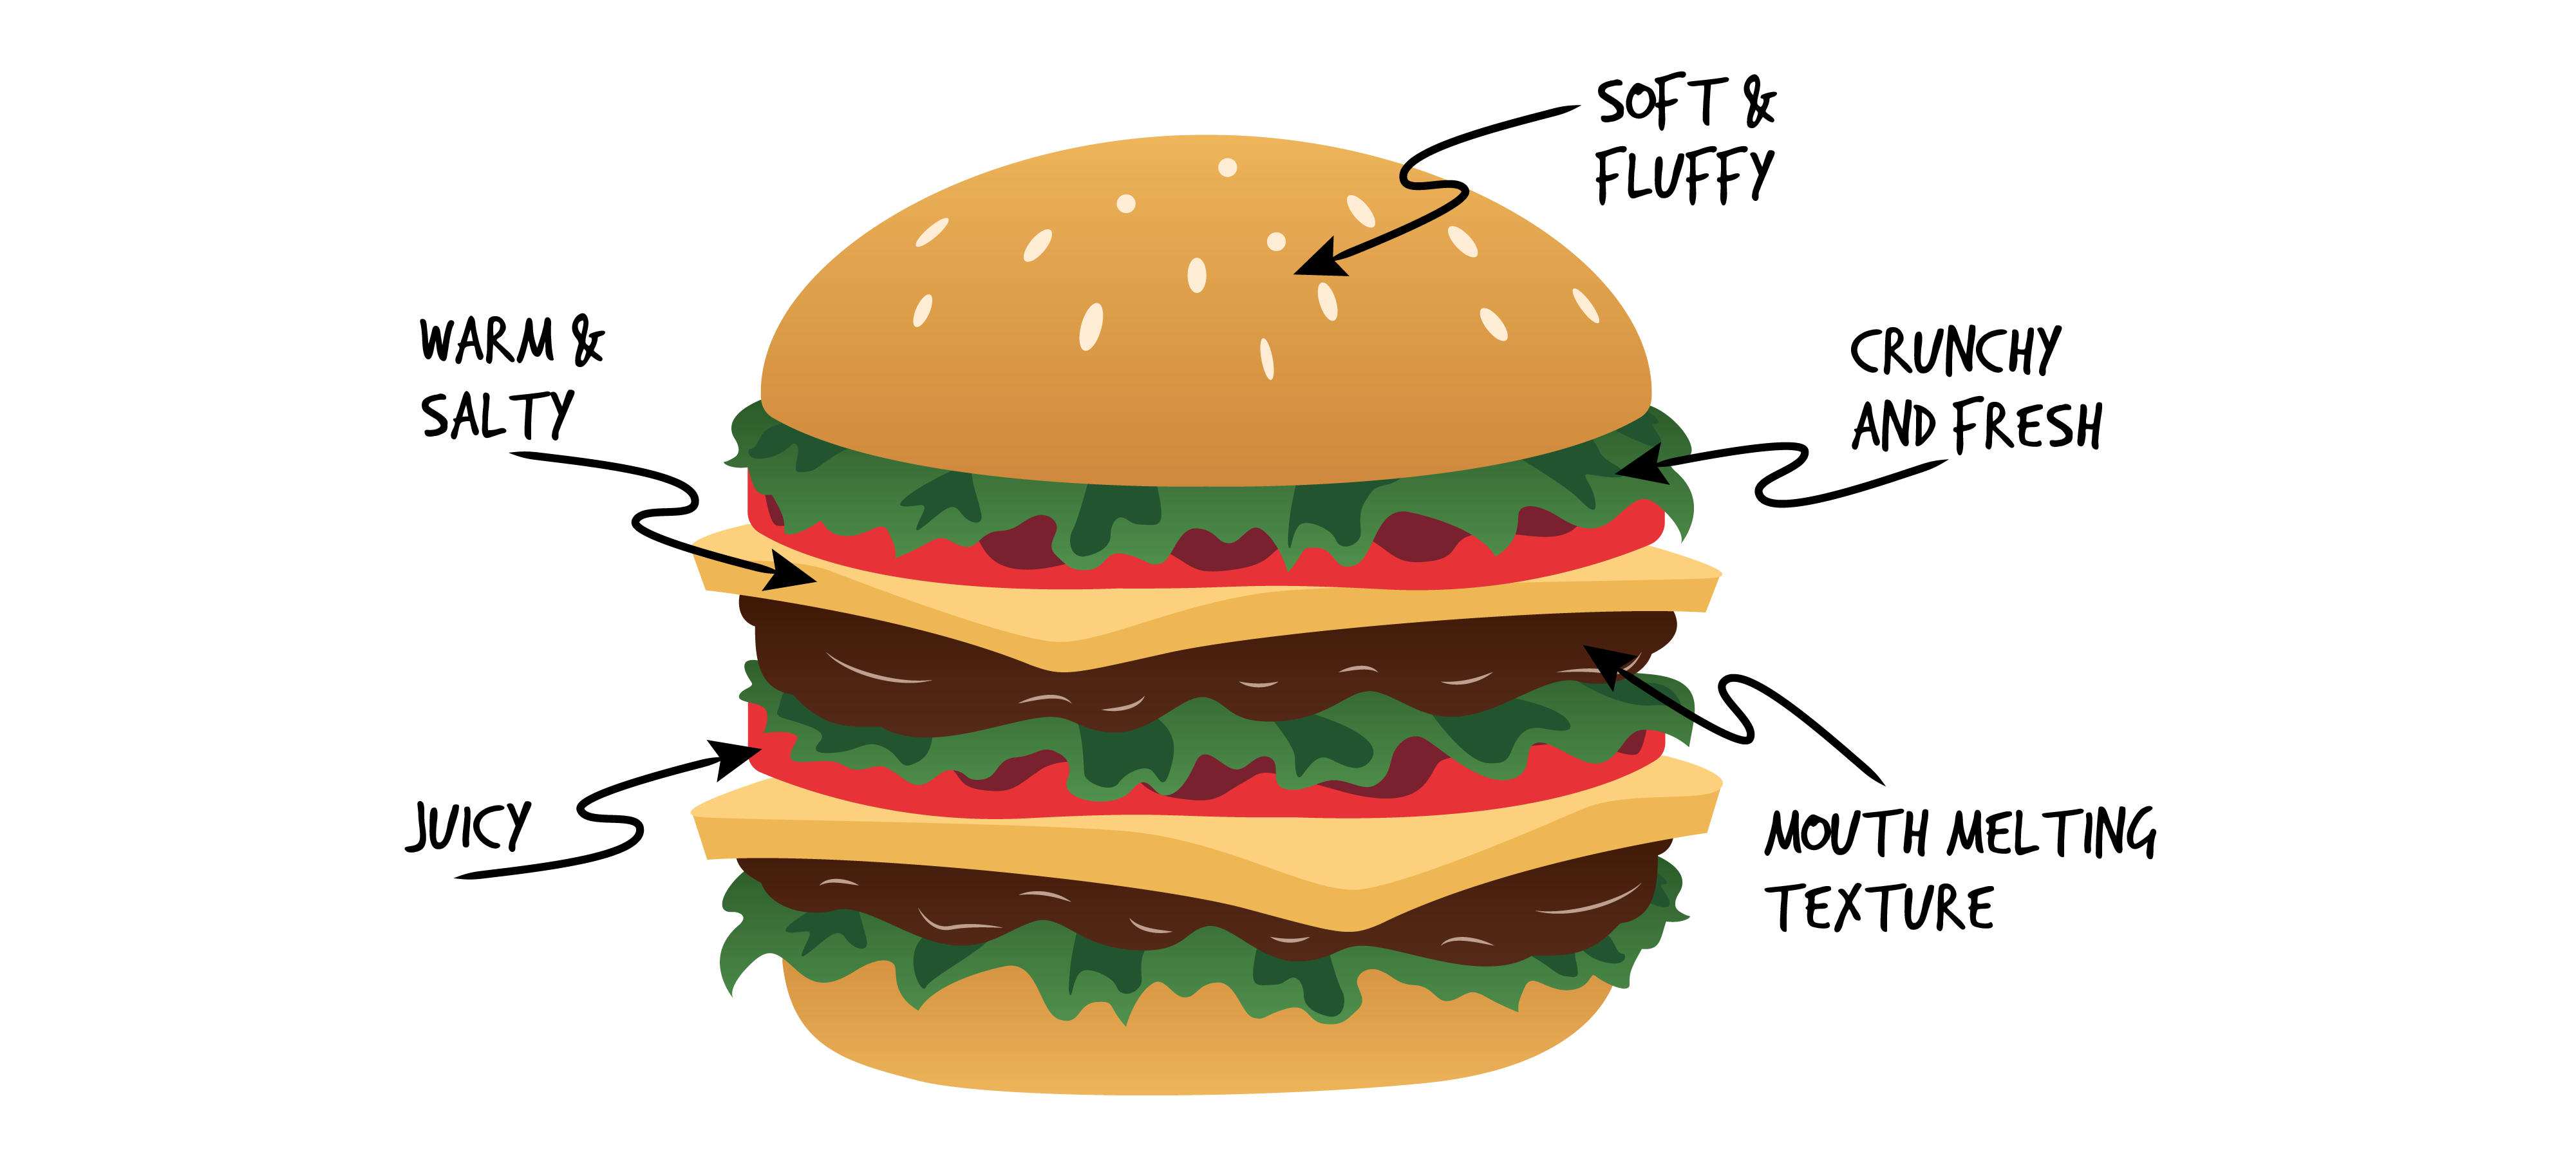 Burger with sesame bun and two layers of lettuce, patty, cheese and tomato. Text Soft &amp; fluffy with arrow pointing to top bun. Text Warm &amp; salty with arrow pointing to cheese. Text Juicy with arrow pointing to tomato. Text Crunchy &amp; fresh with arrow pointing to lettuce. Text Mouth melting texture with arrow pointing to patty.